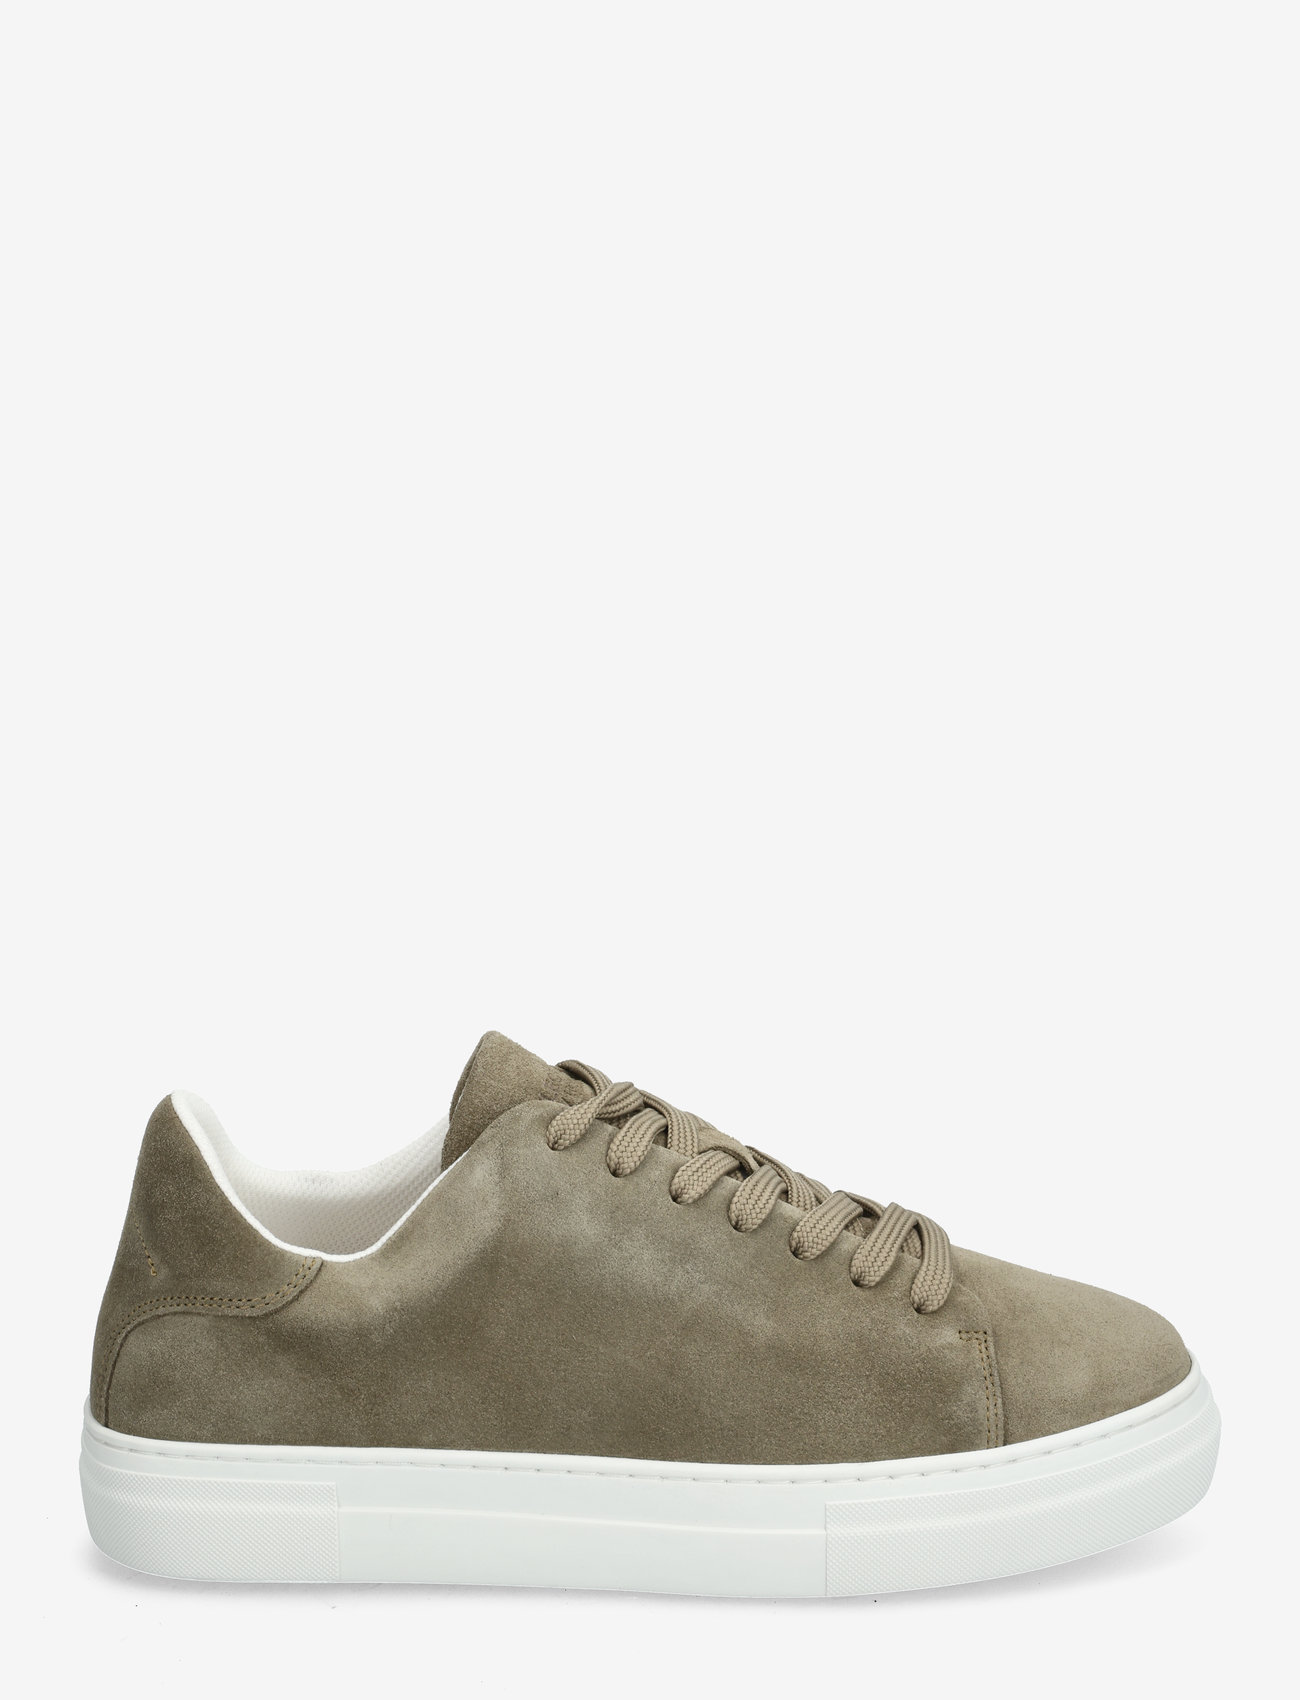 Selected Homme - SLHDAVID CHUNKY CLEAN SUEDE TRAINER B - niedriger schnitt - grape leaf - 1